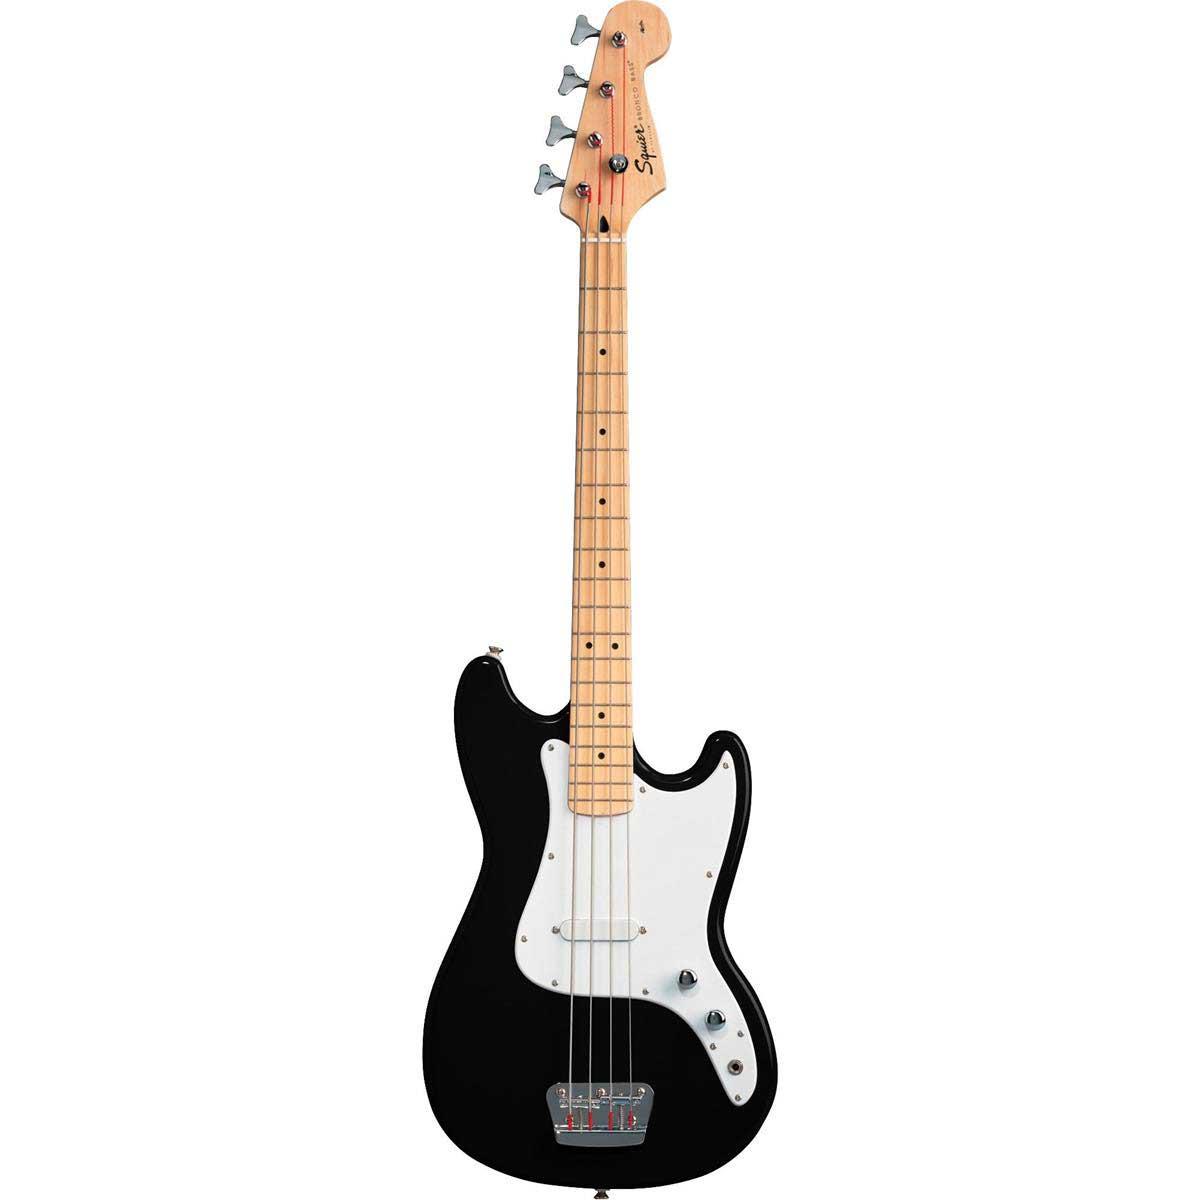 Image of Squier Affinity Series Bronco Bass Guitar